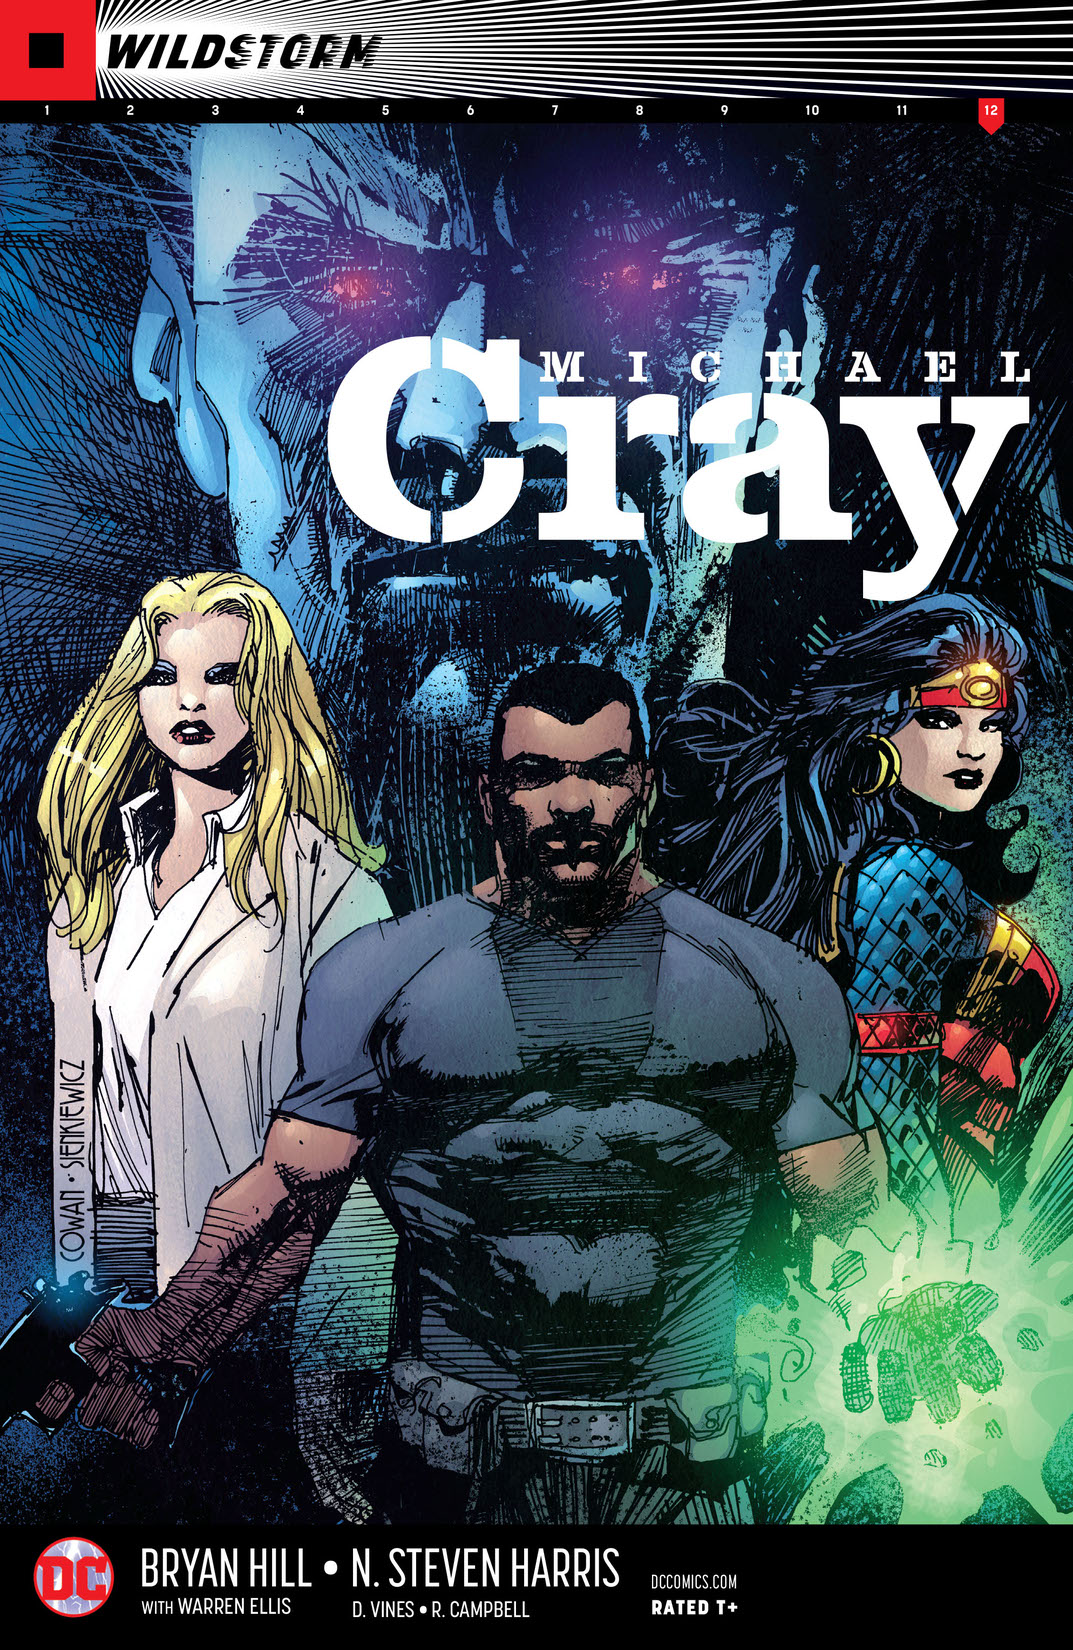 The Wild Storm: Michael Cray #12 preview images